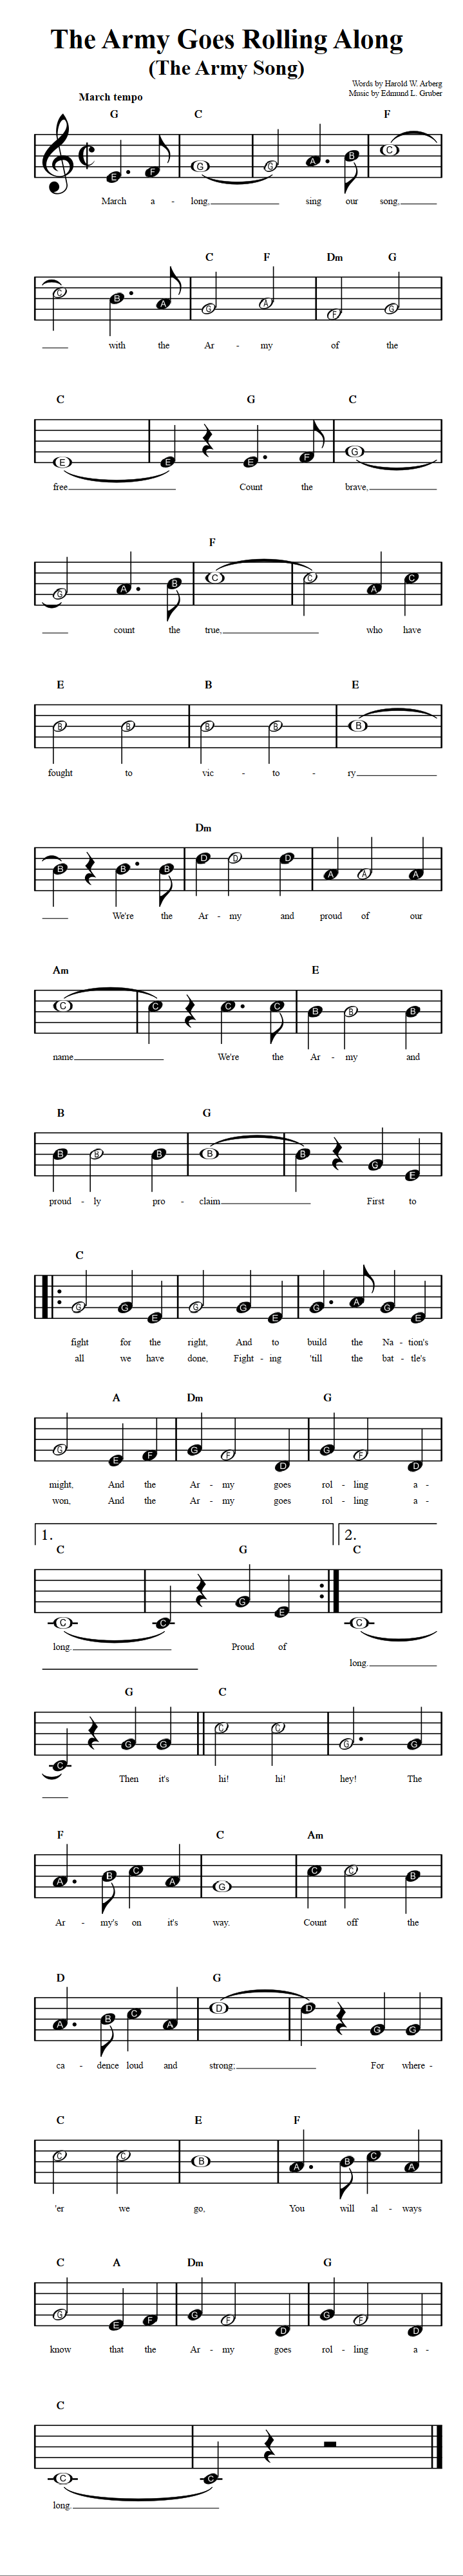 The Army Goes Rolling Along  Beginner Sheet Music